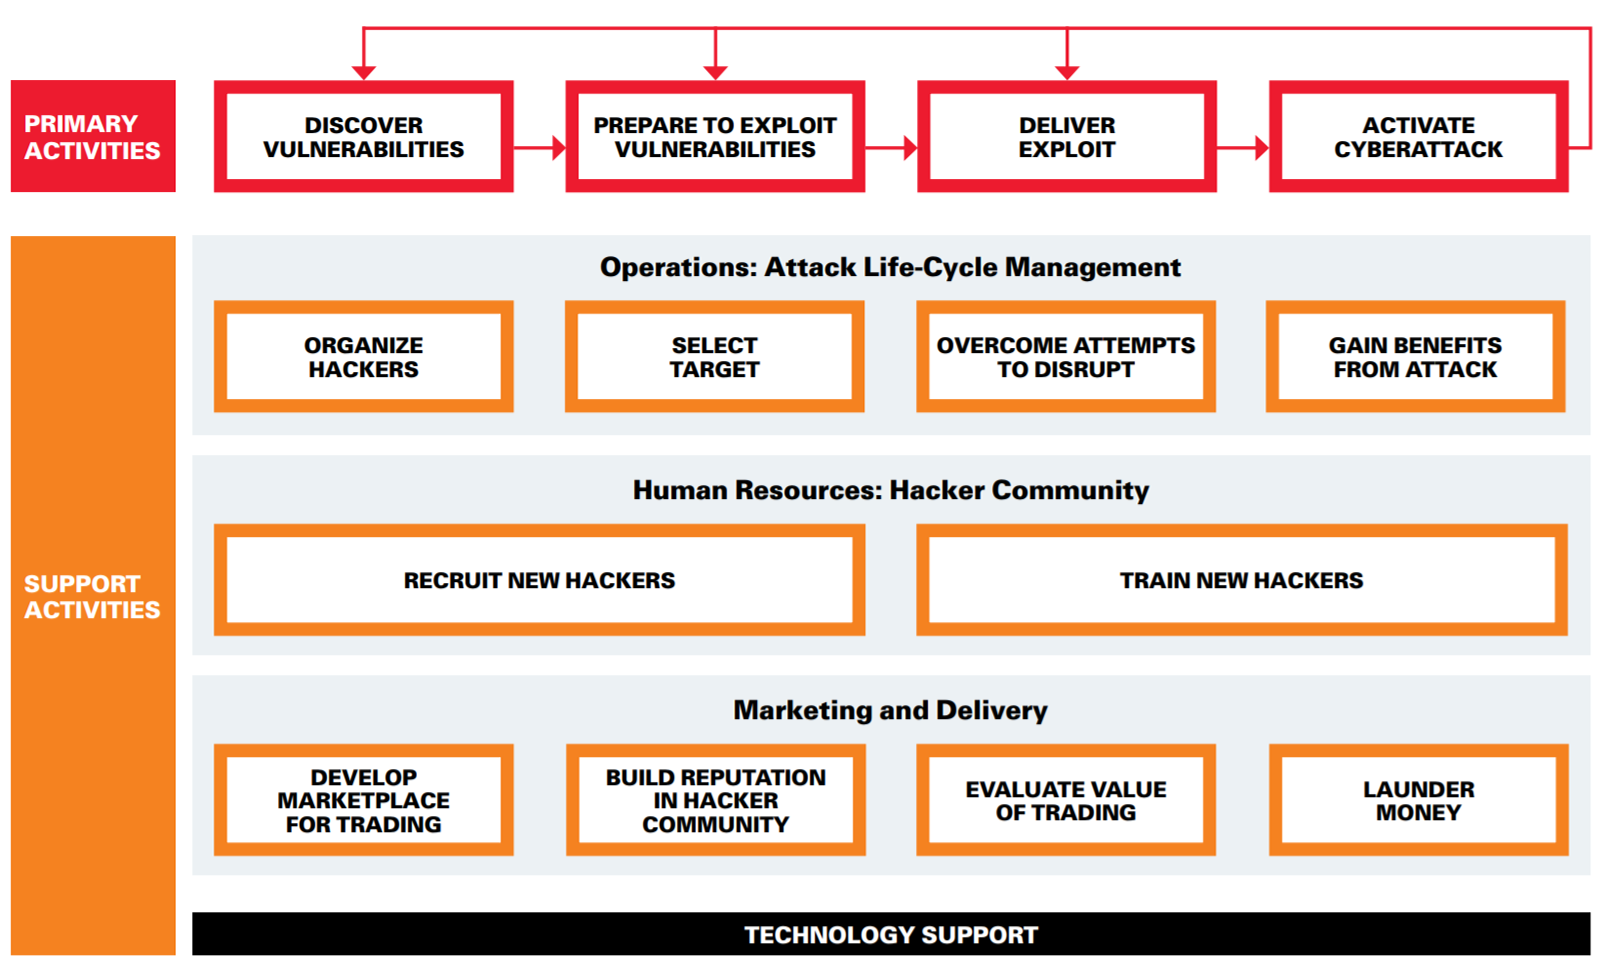 Activities in the Cybercrime Ecosystem